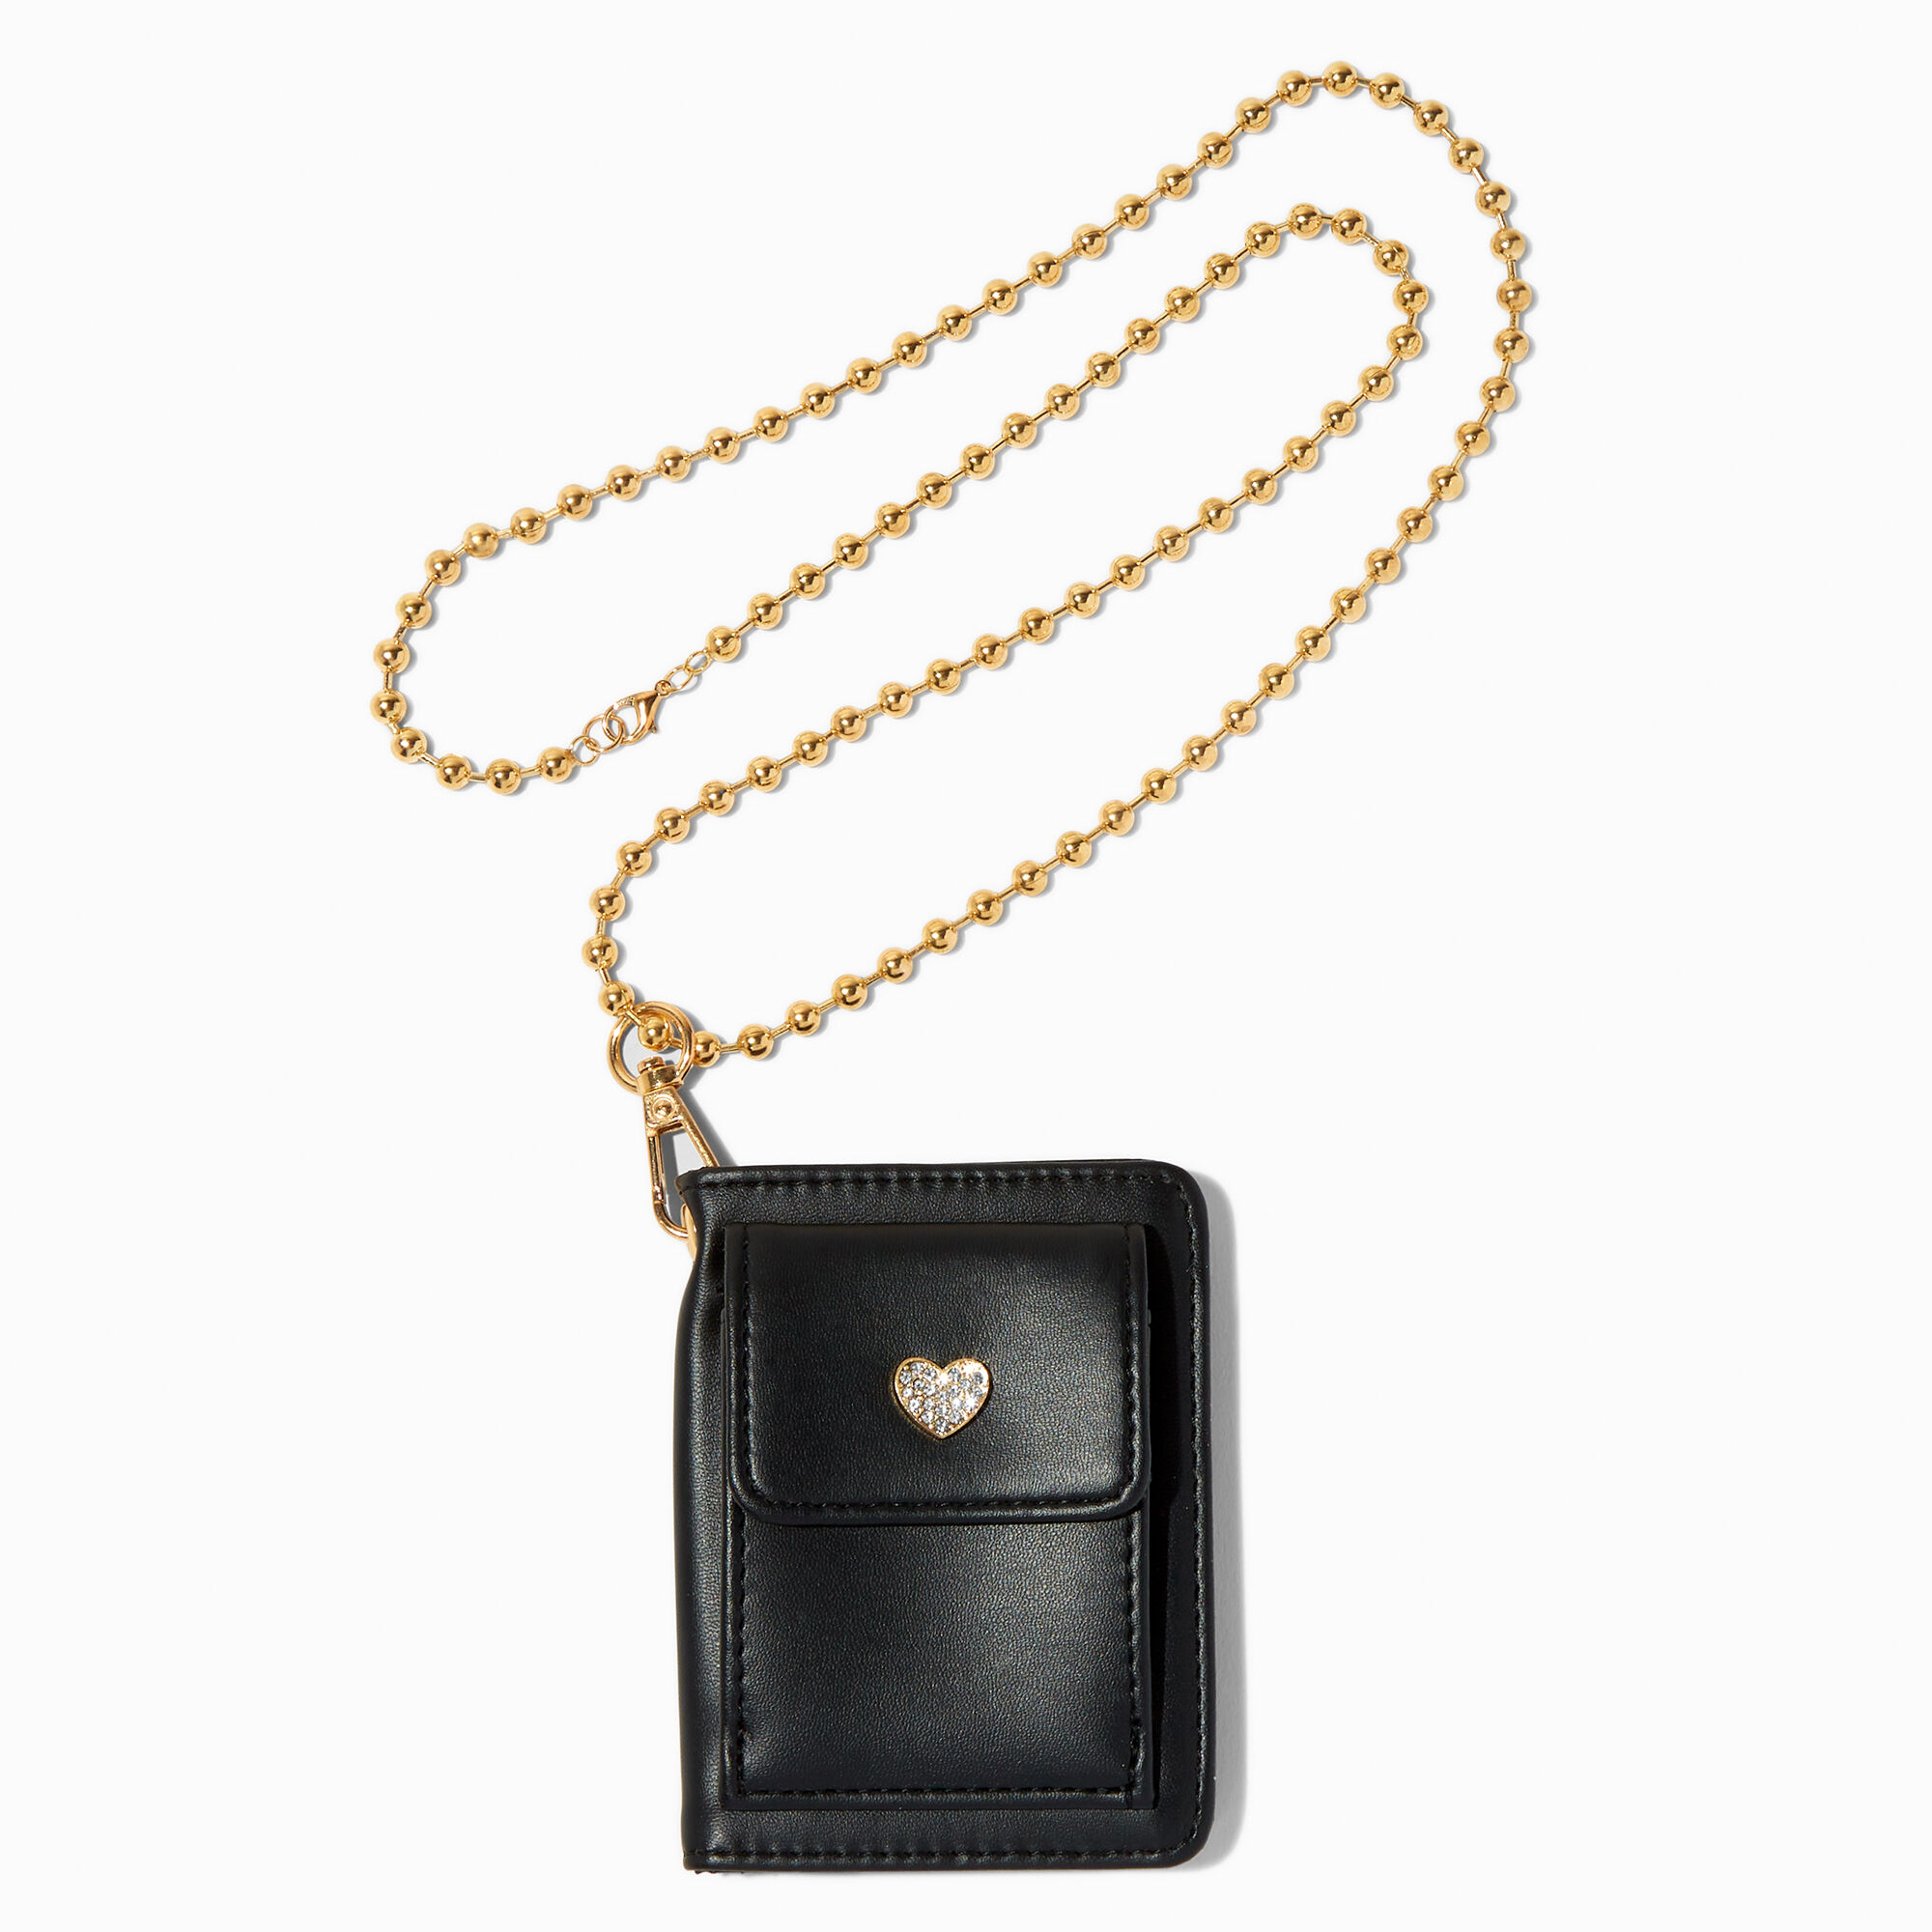 View Claires Crystal Heart Wallet On GoldTone Chain Lanyard Black information